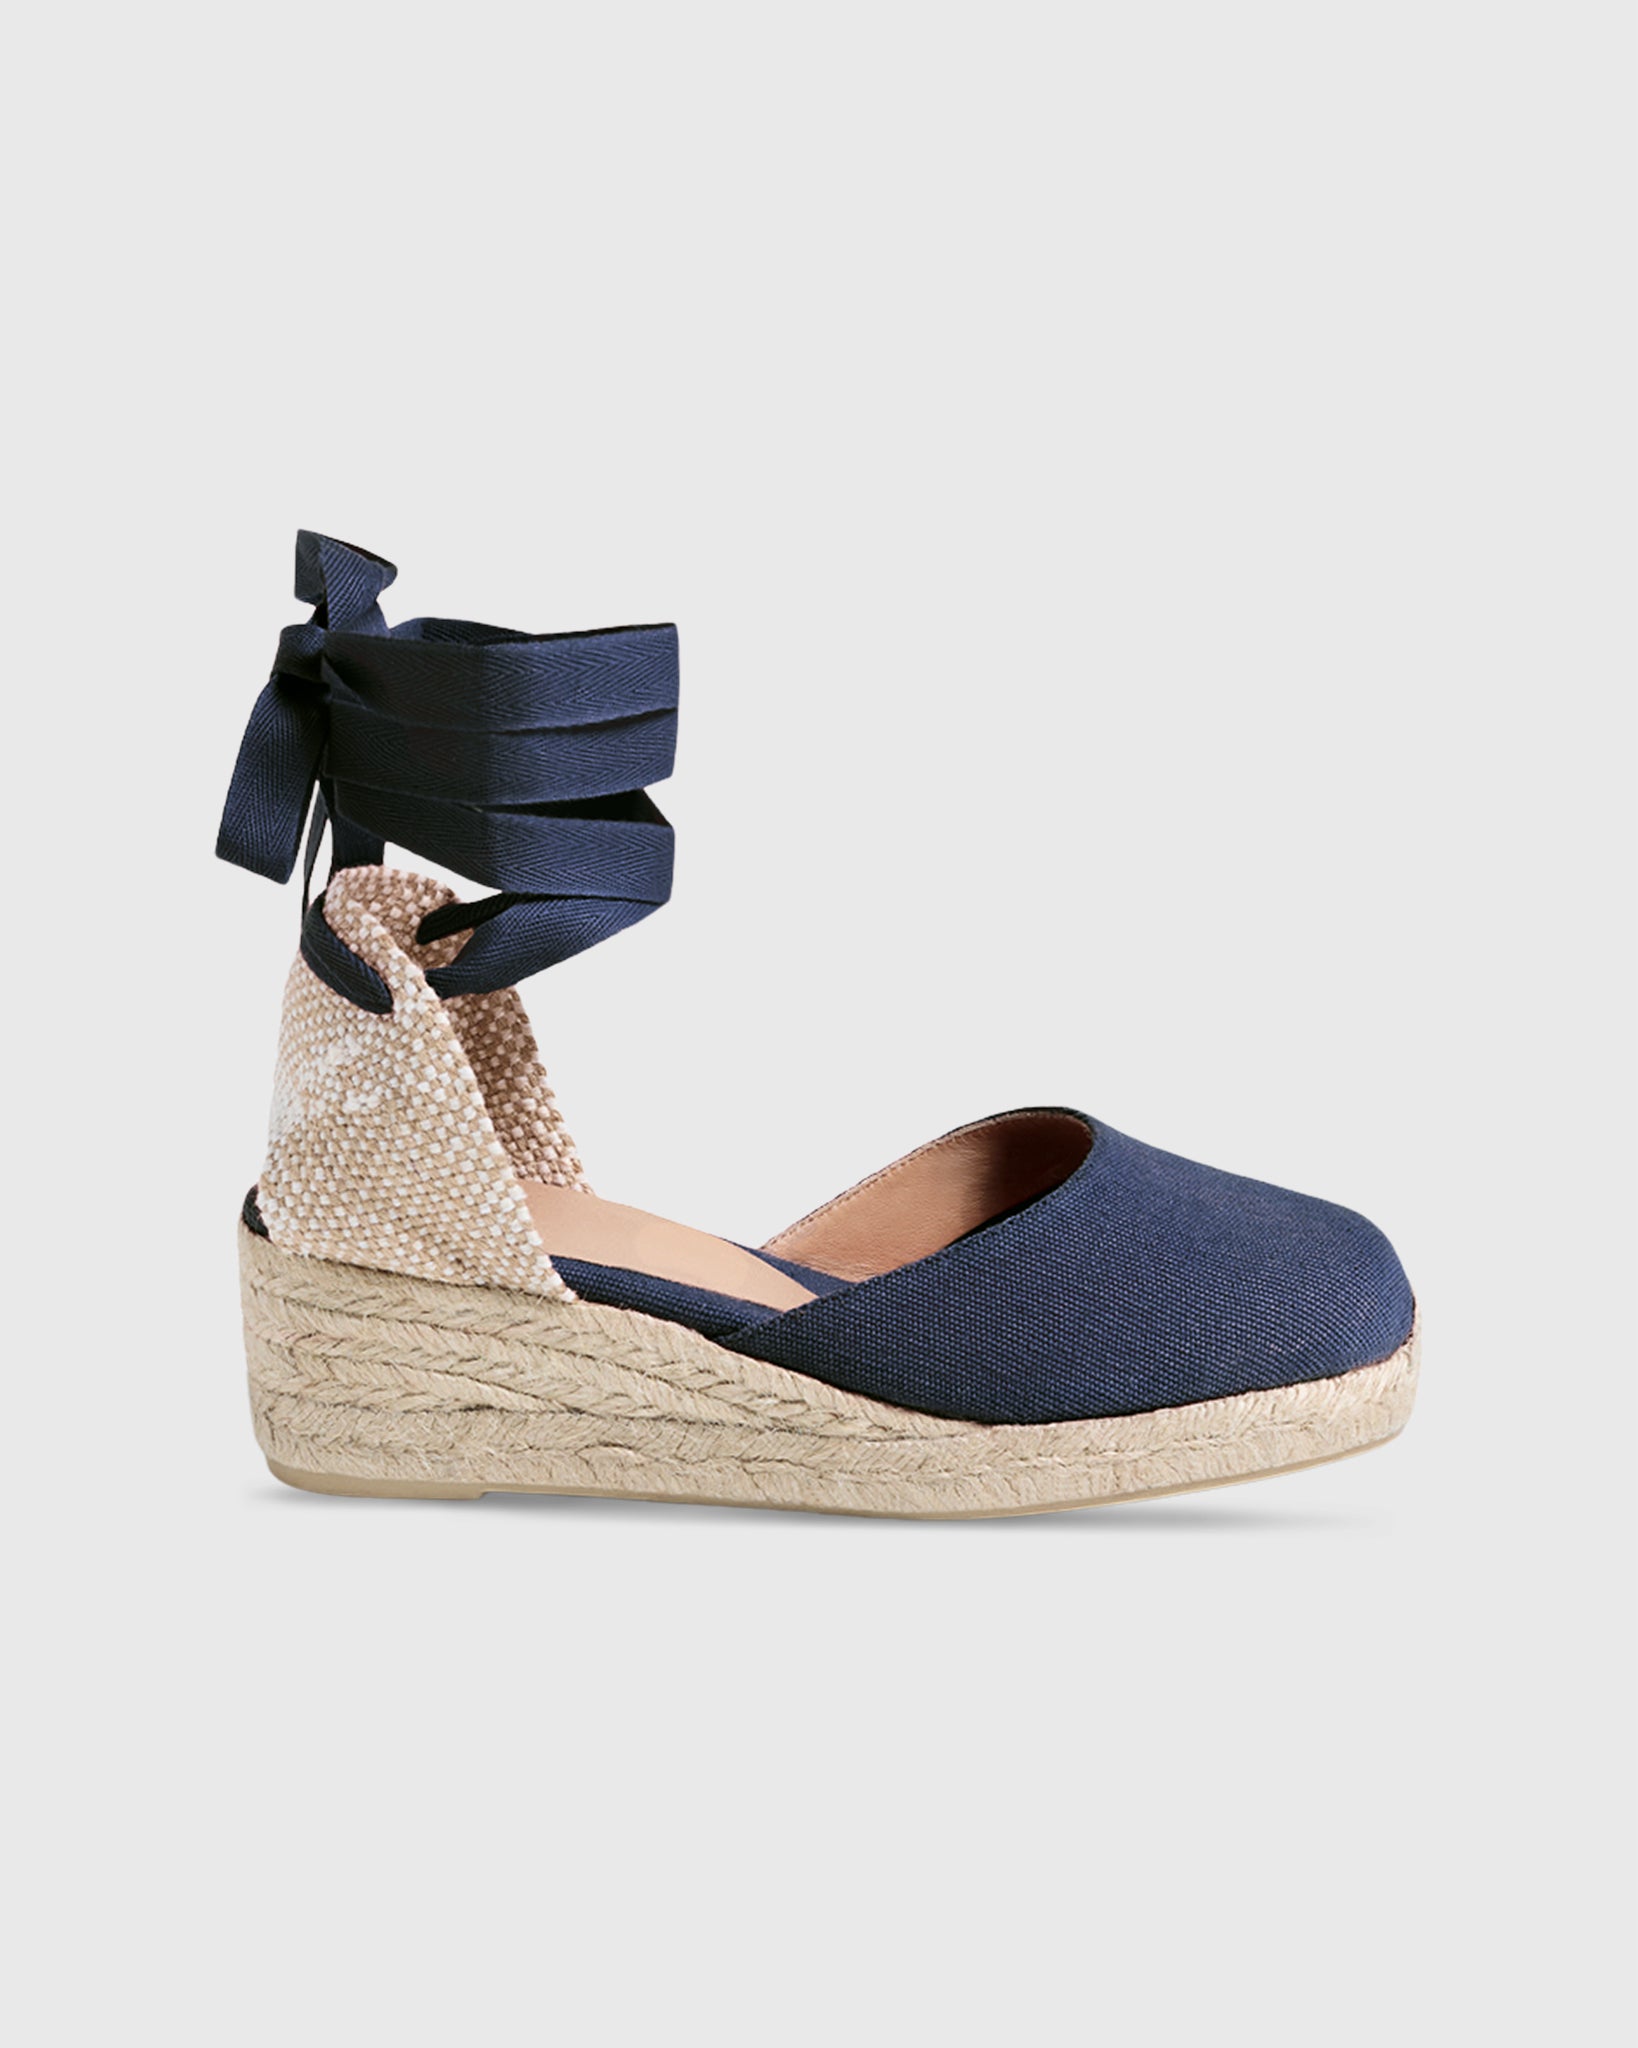 Extra Low Carina Espadrille in Navy Oxford Canvas